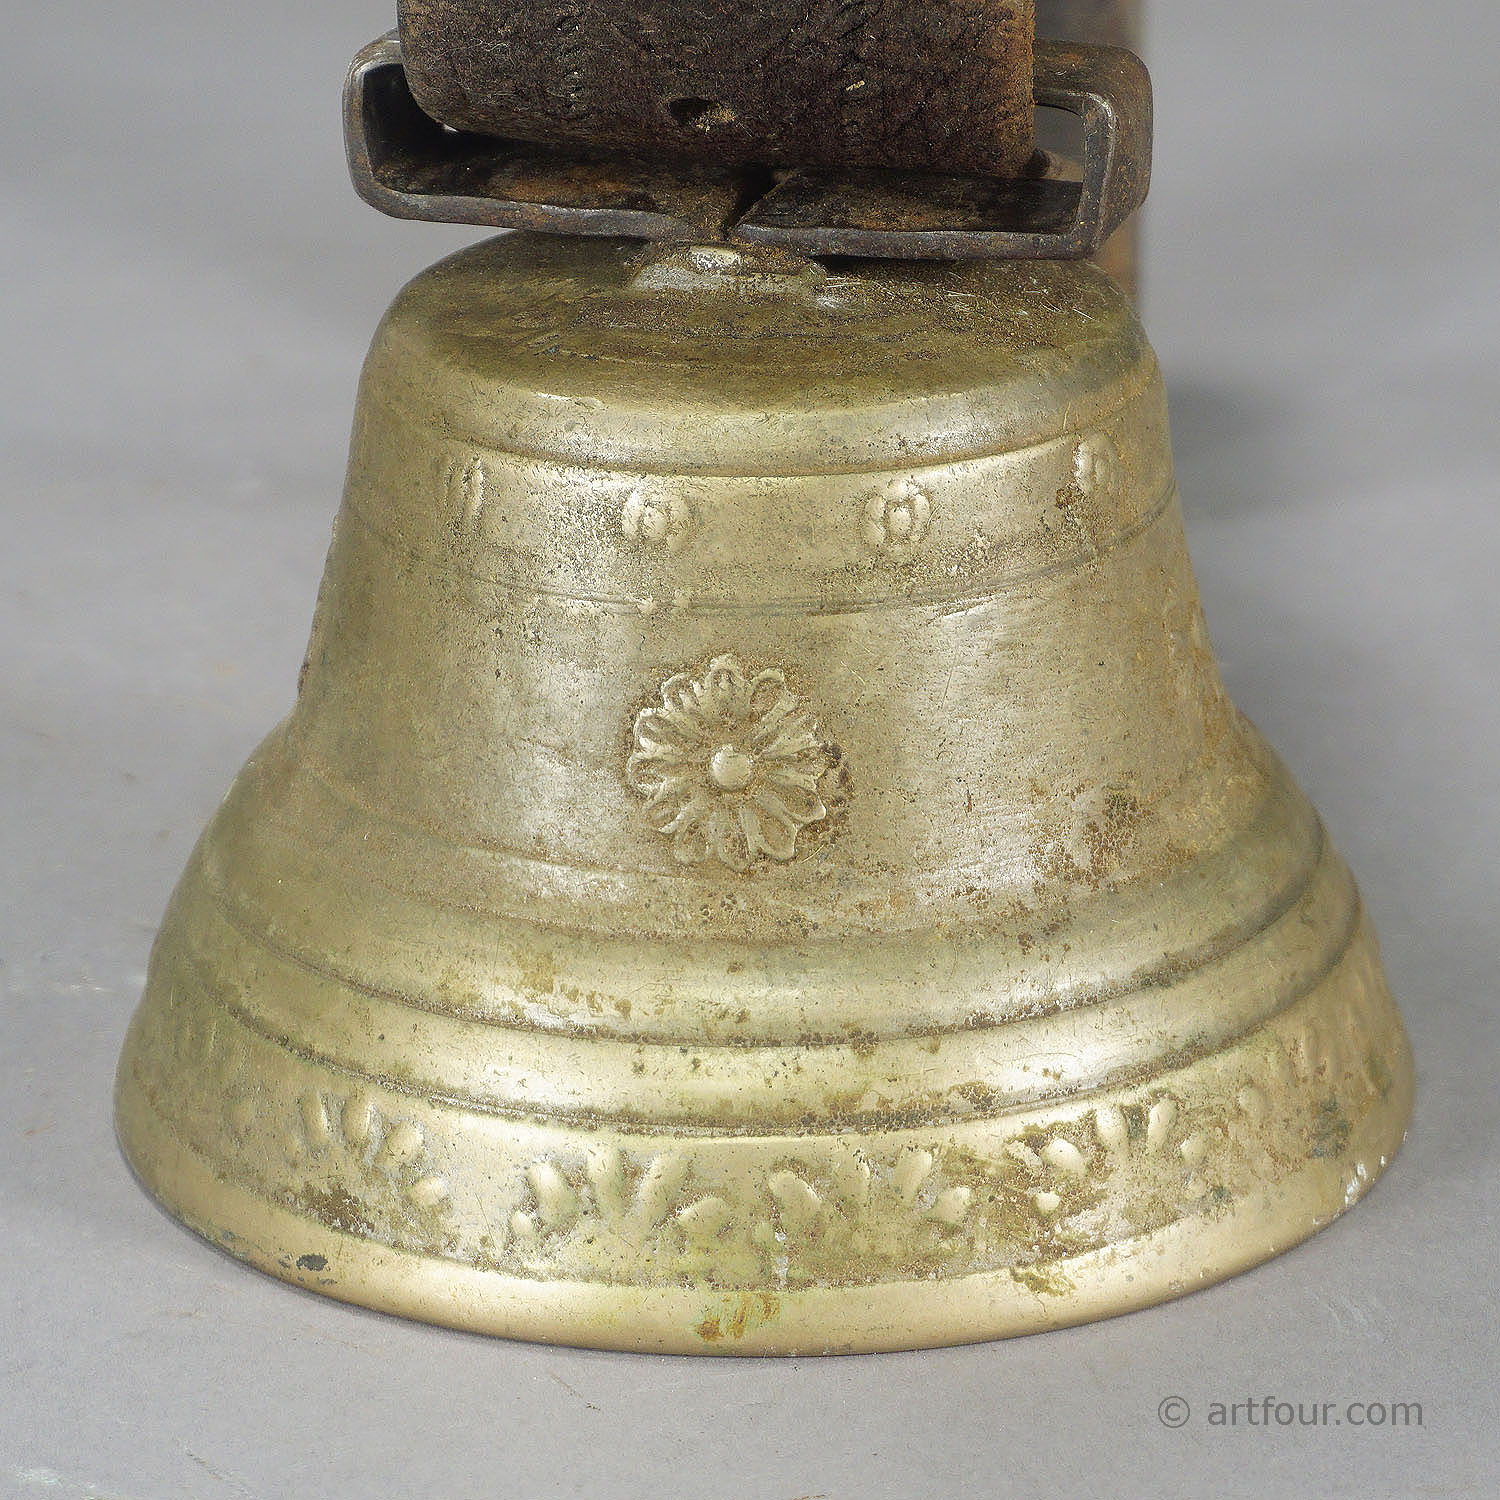 Casted Bronze Cow Bell with Leather Strap, Switzerland ca. 1900